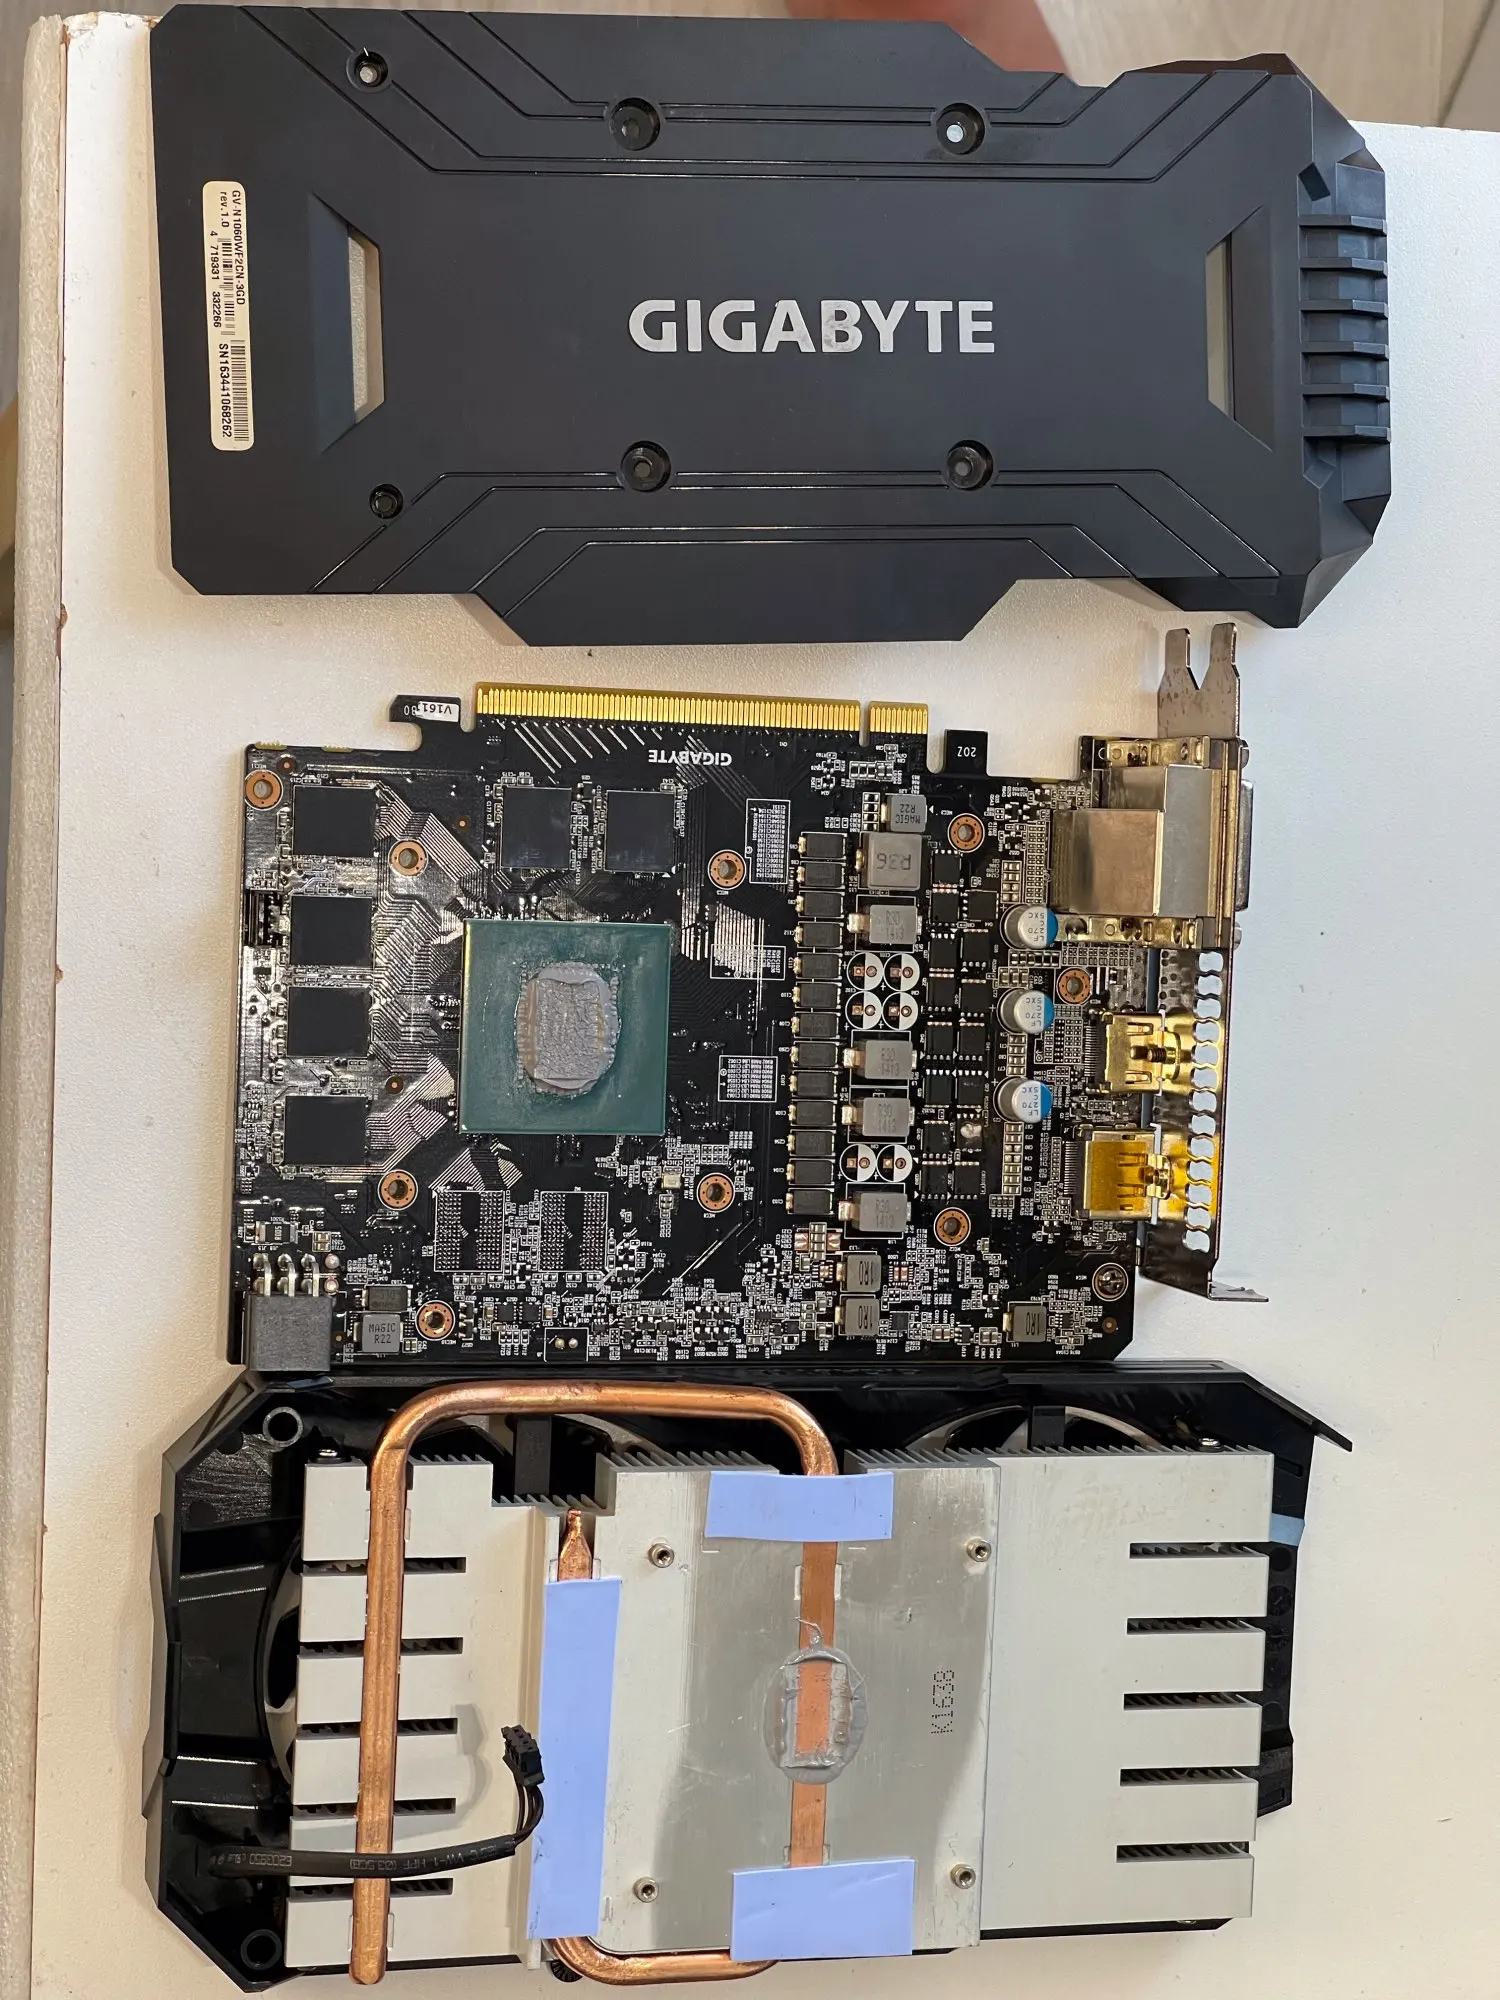 Used GIGABYTE GeForce GTX 1060 5G Gaming Graphic Card GDDR5 6pin PCI-E 3.0 x 16 Video Cards GPU Desktop CPU Motherboard photo review